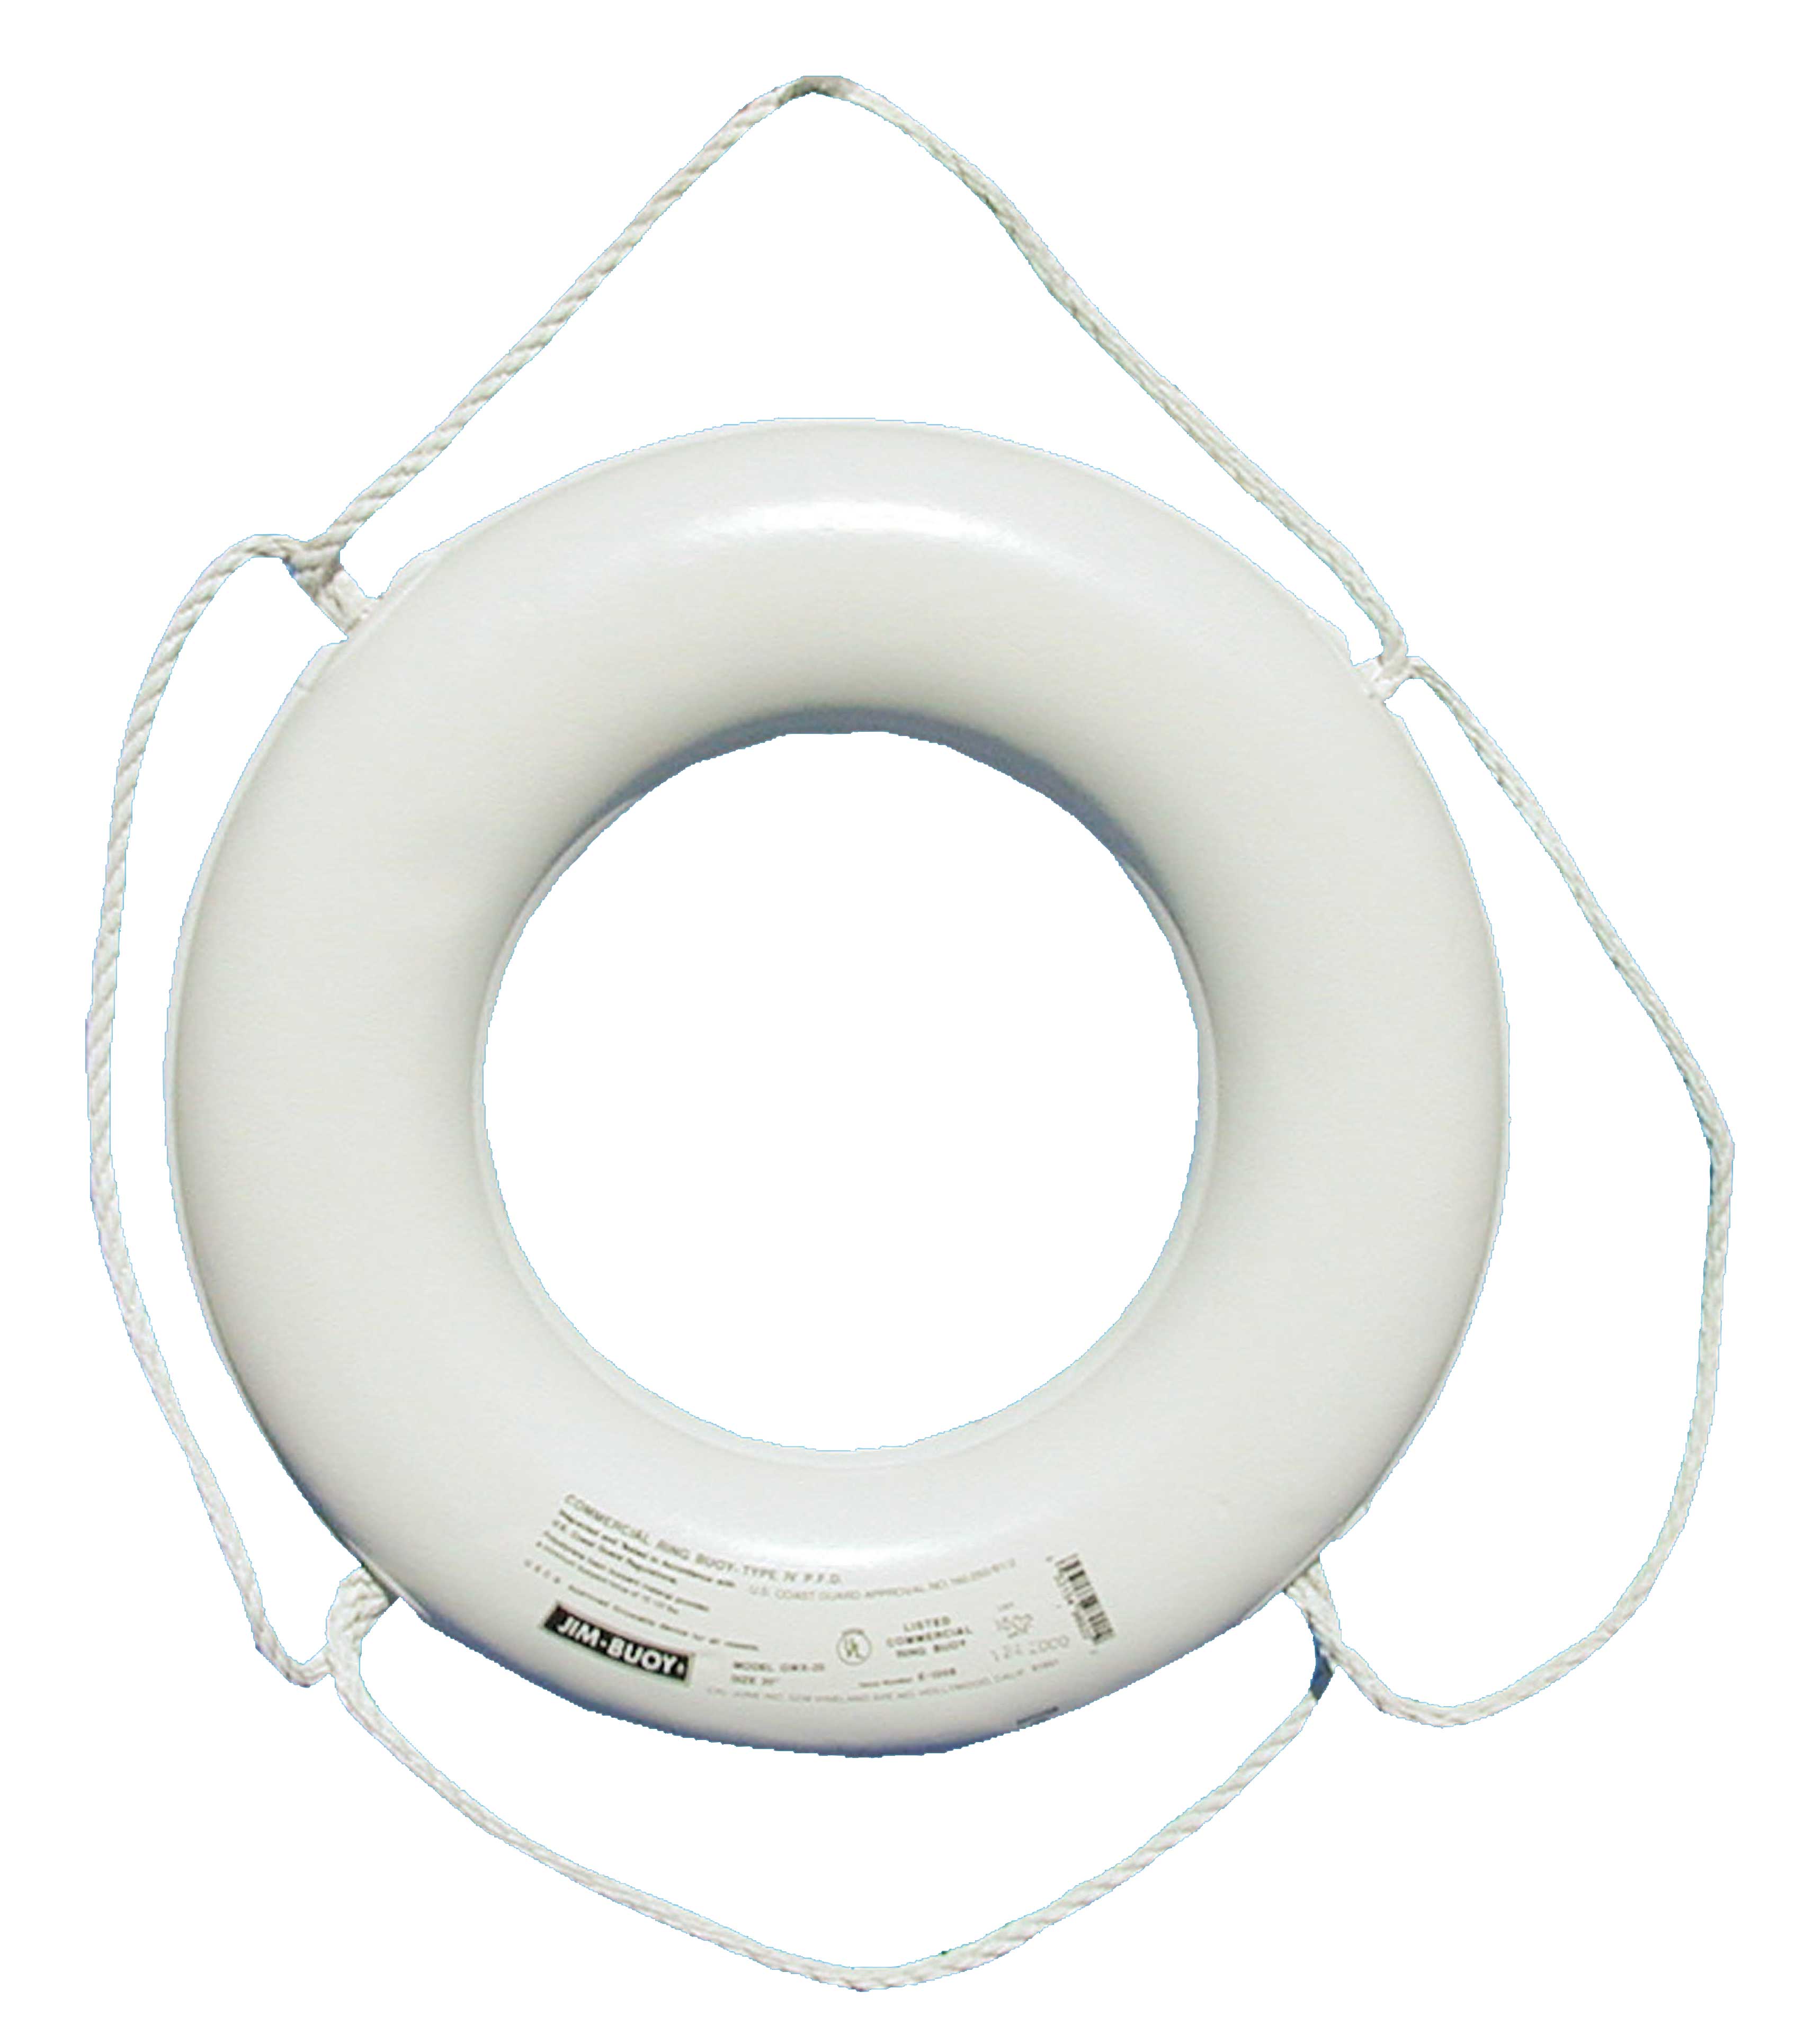 Jim-Buoy GW-X-20 GX-Series Life Ring with Rope Molded Into Core - 20", White